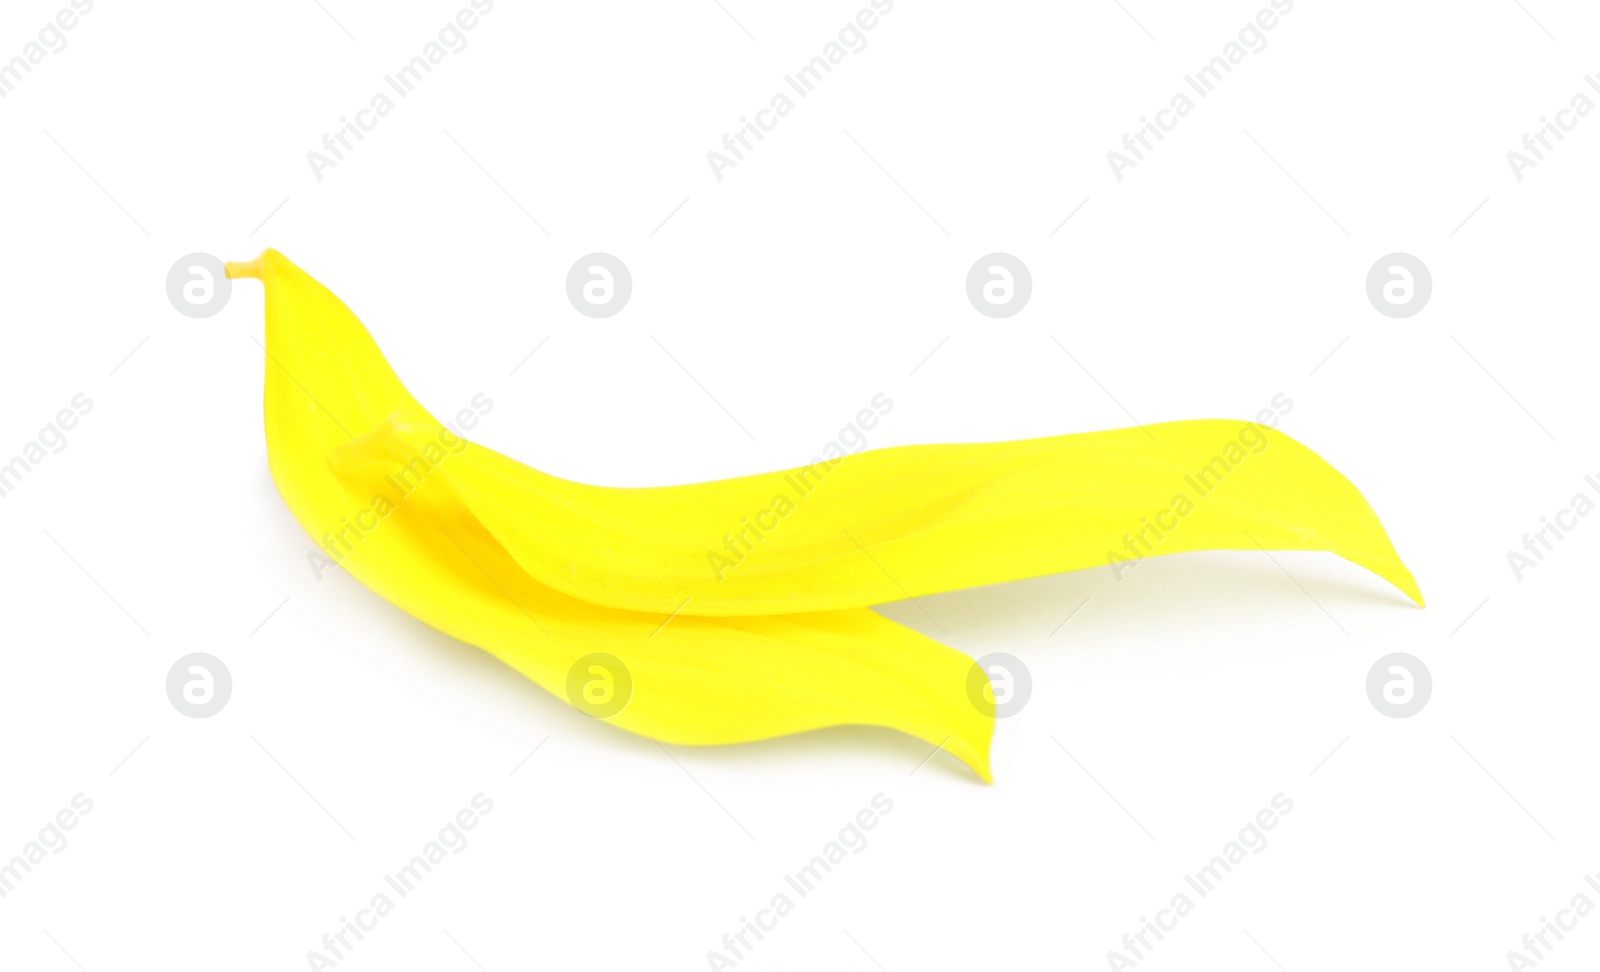 Photo of Fresh yellow sunflower petals isolated on white